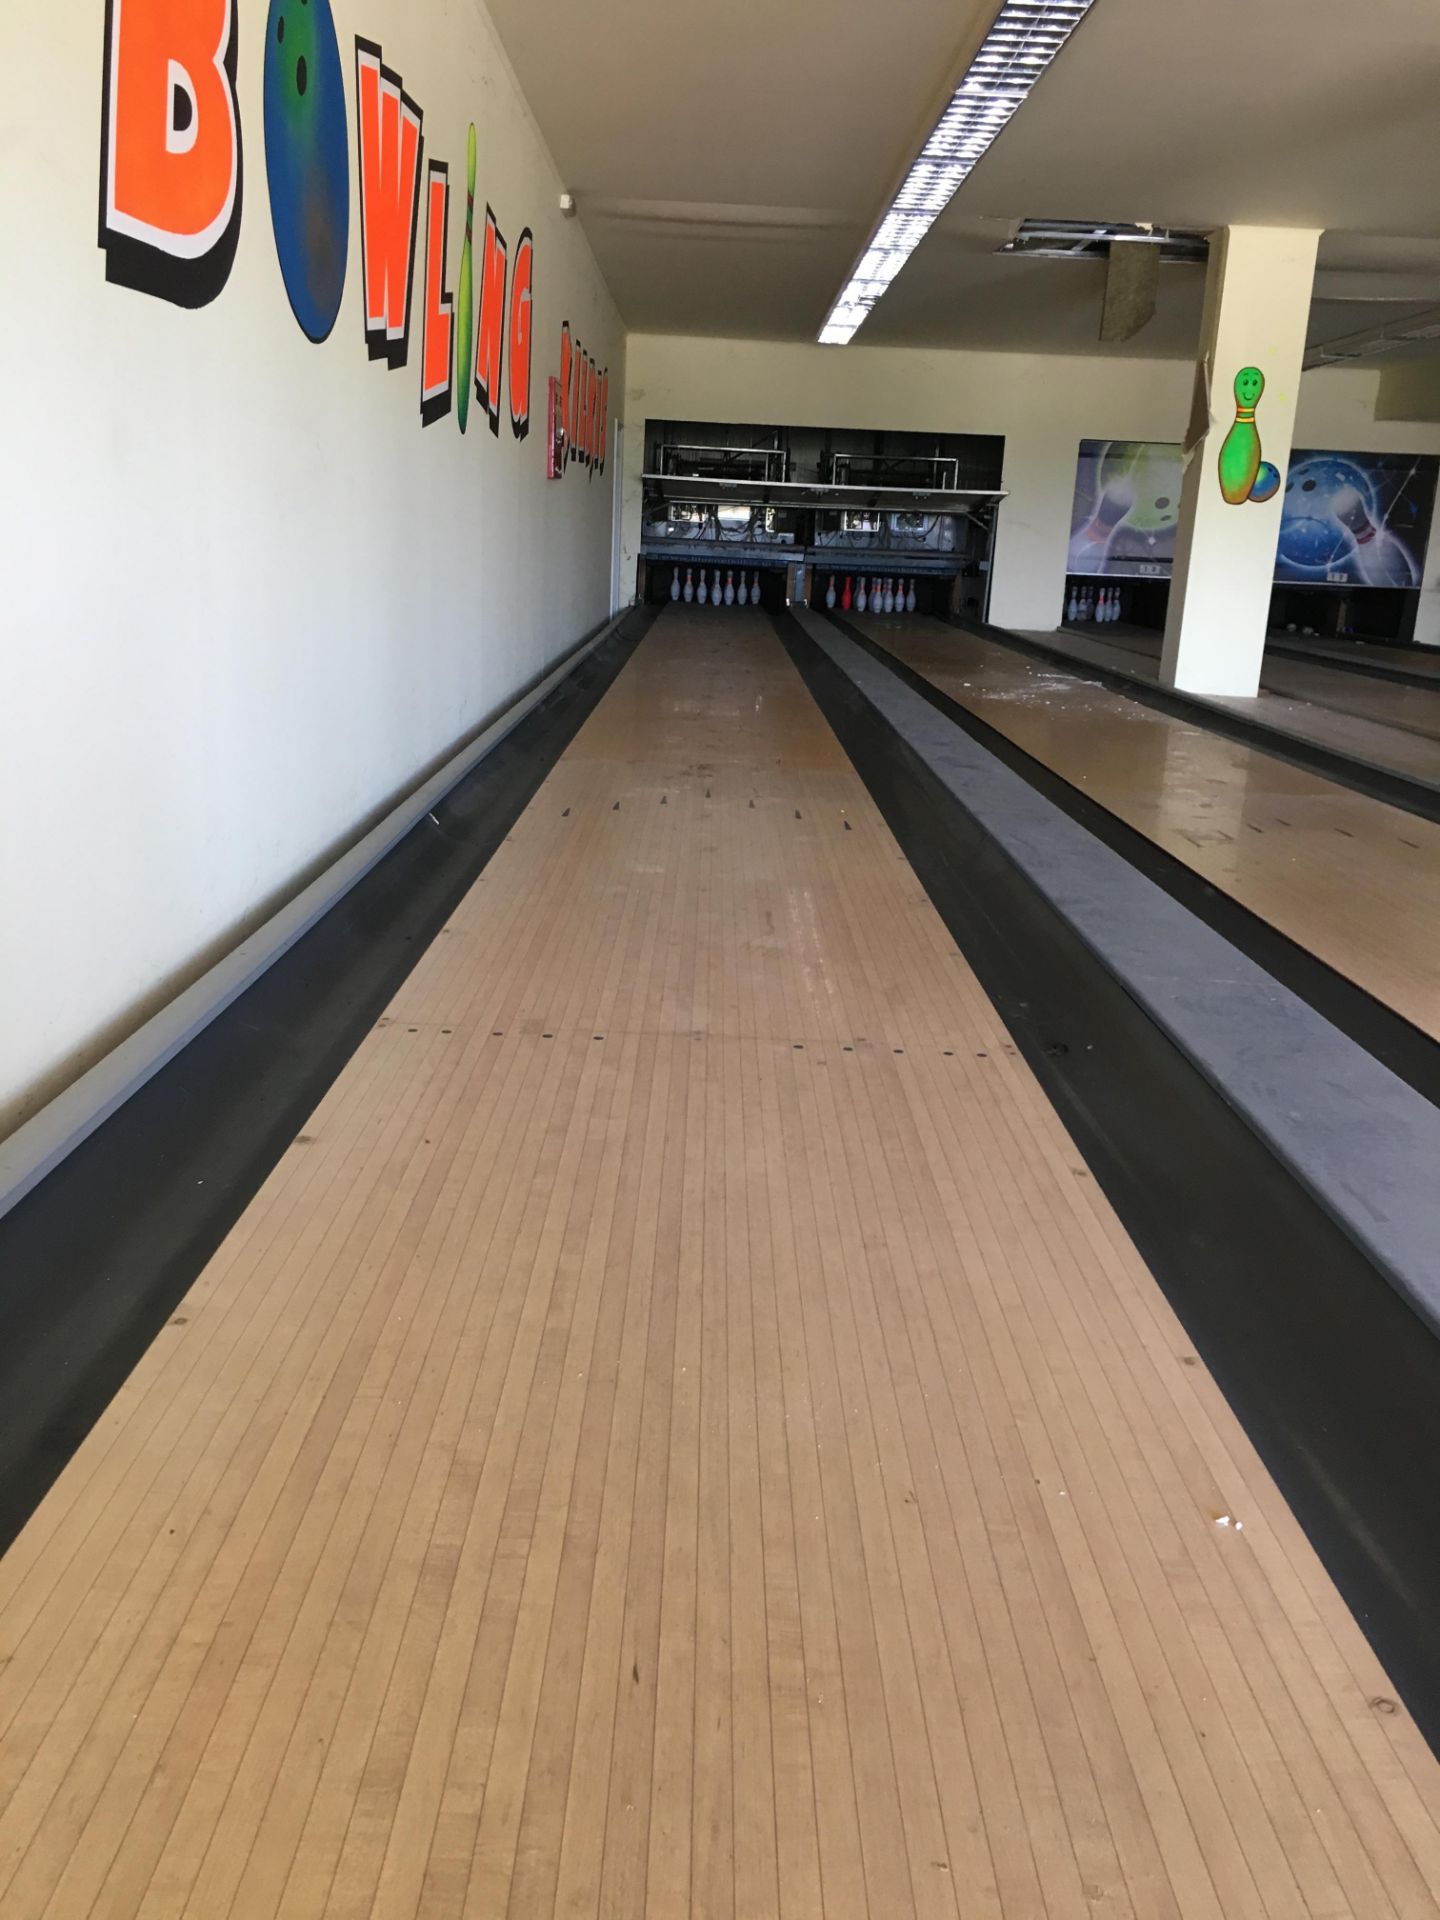 Complete Bowling Facility 4 Lanes Brunswick ( Building Not for Sale) - Image 30 of 86